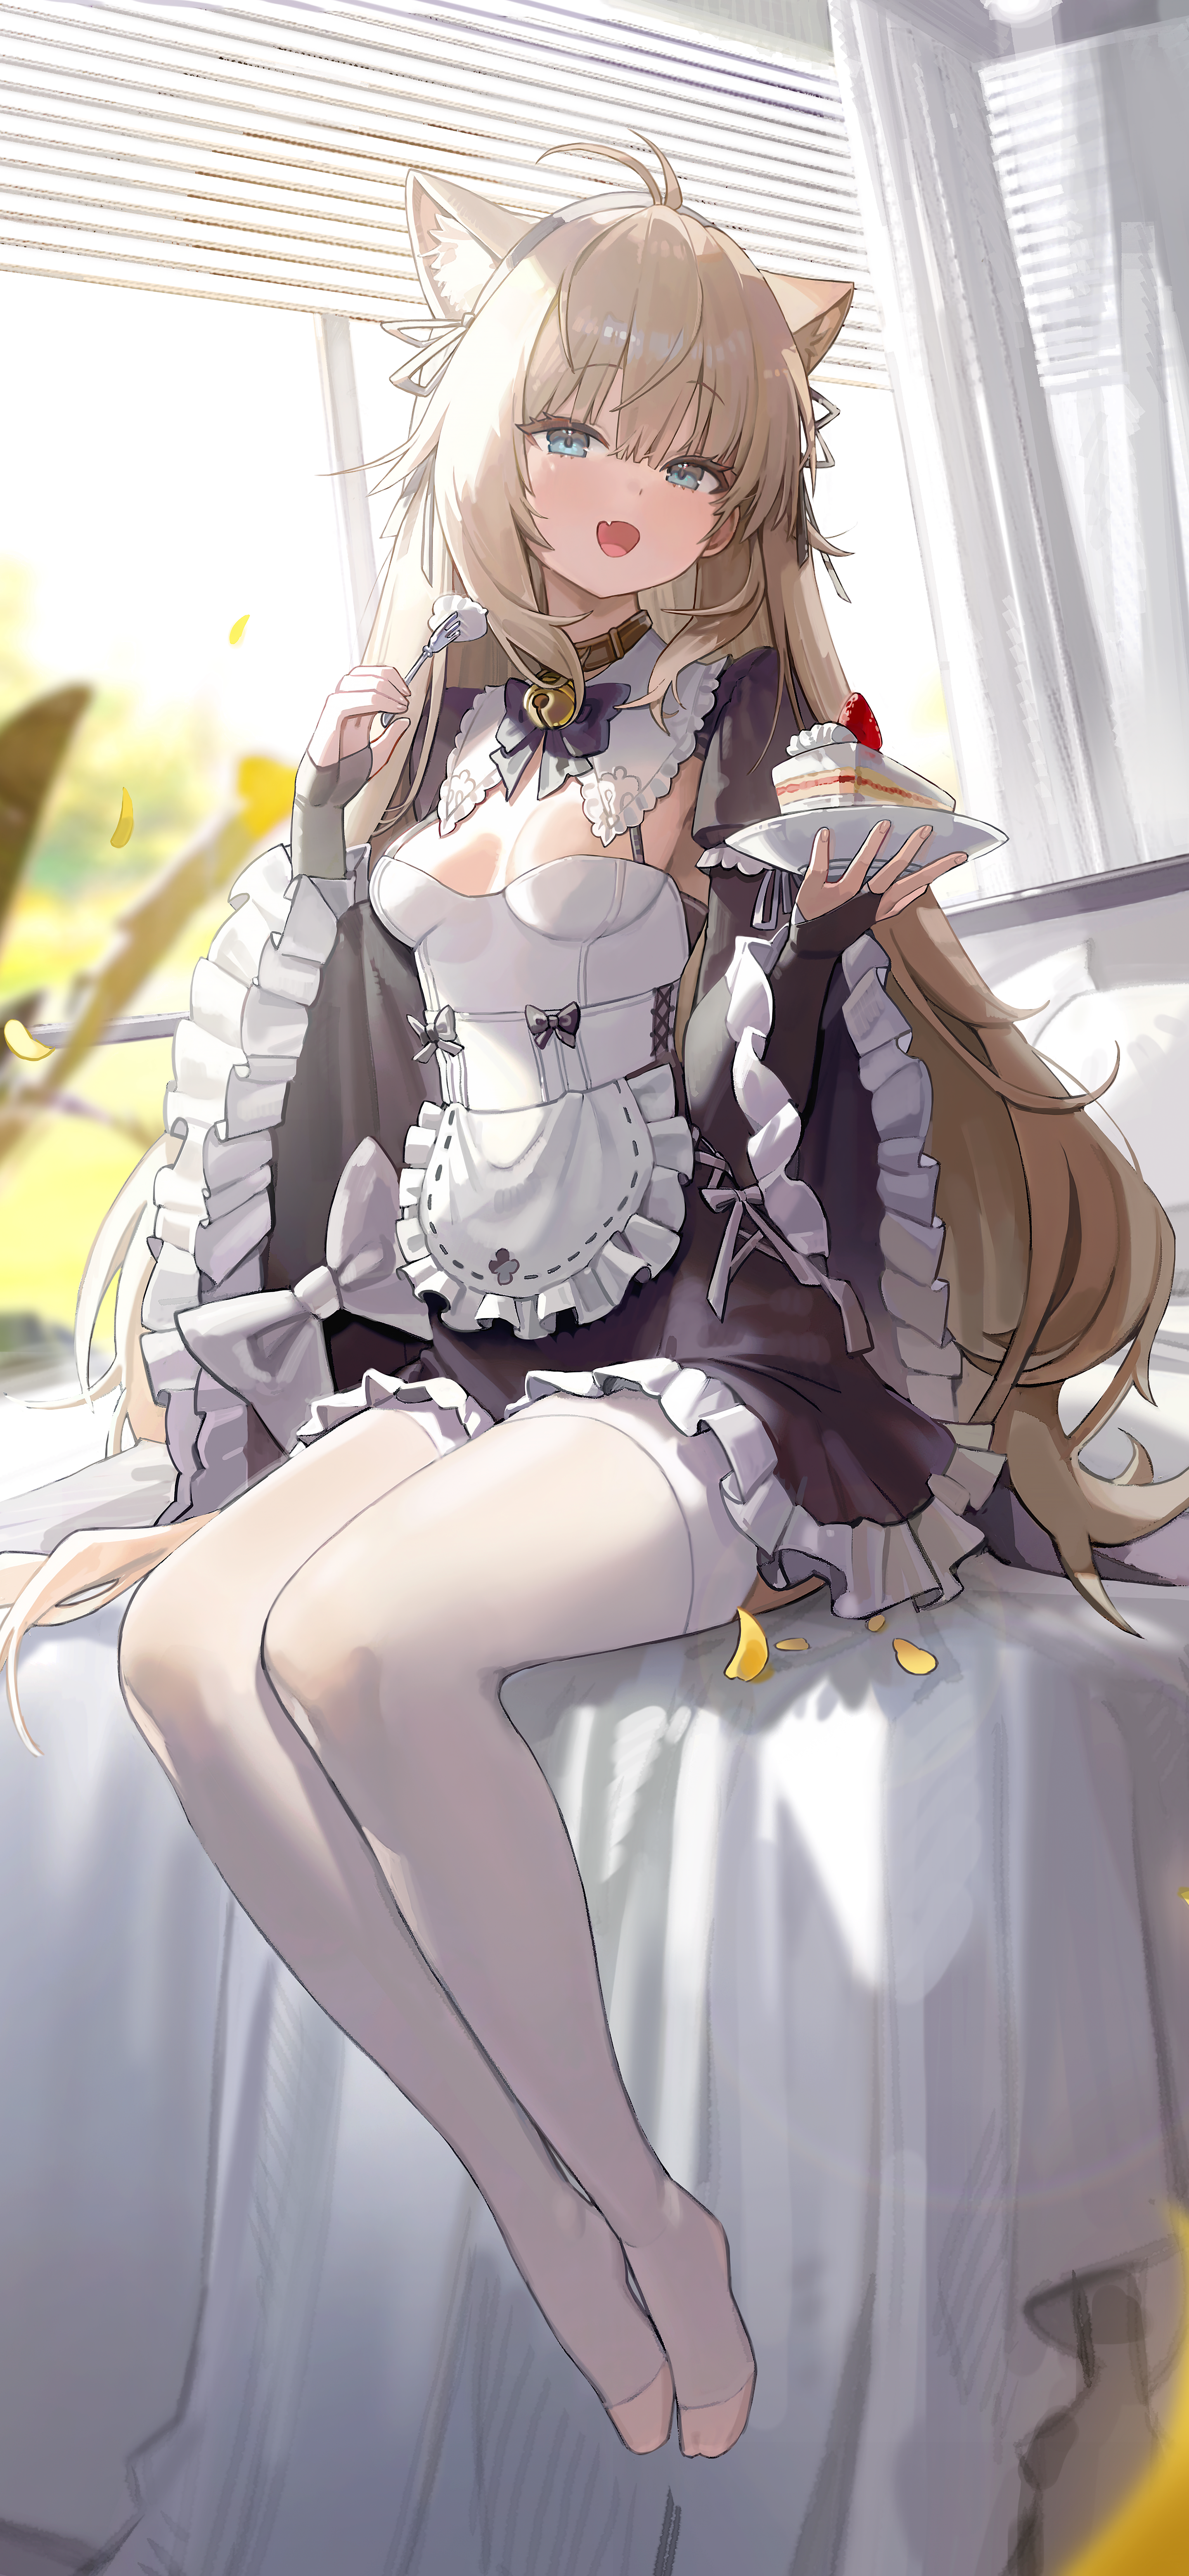 Anime Anime Girls Vertical Maid Maid Outfit Cake Cat Girl Cat Ears Sweets Fork 2880x6240